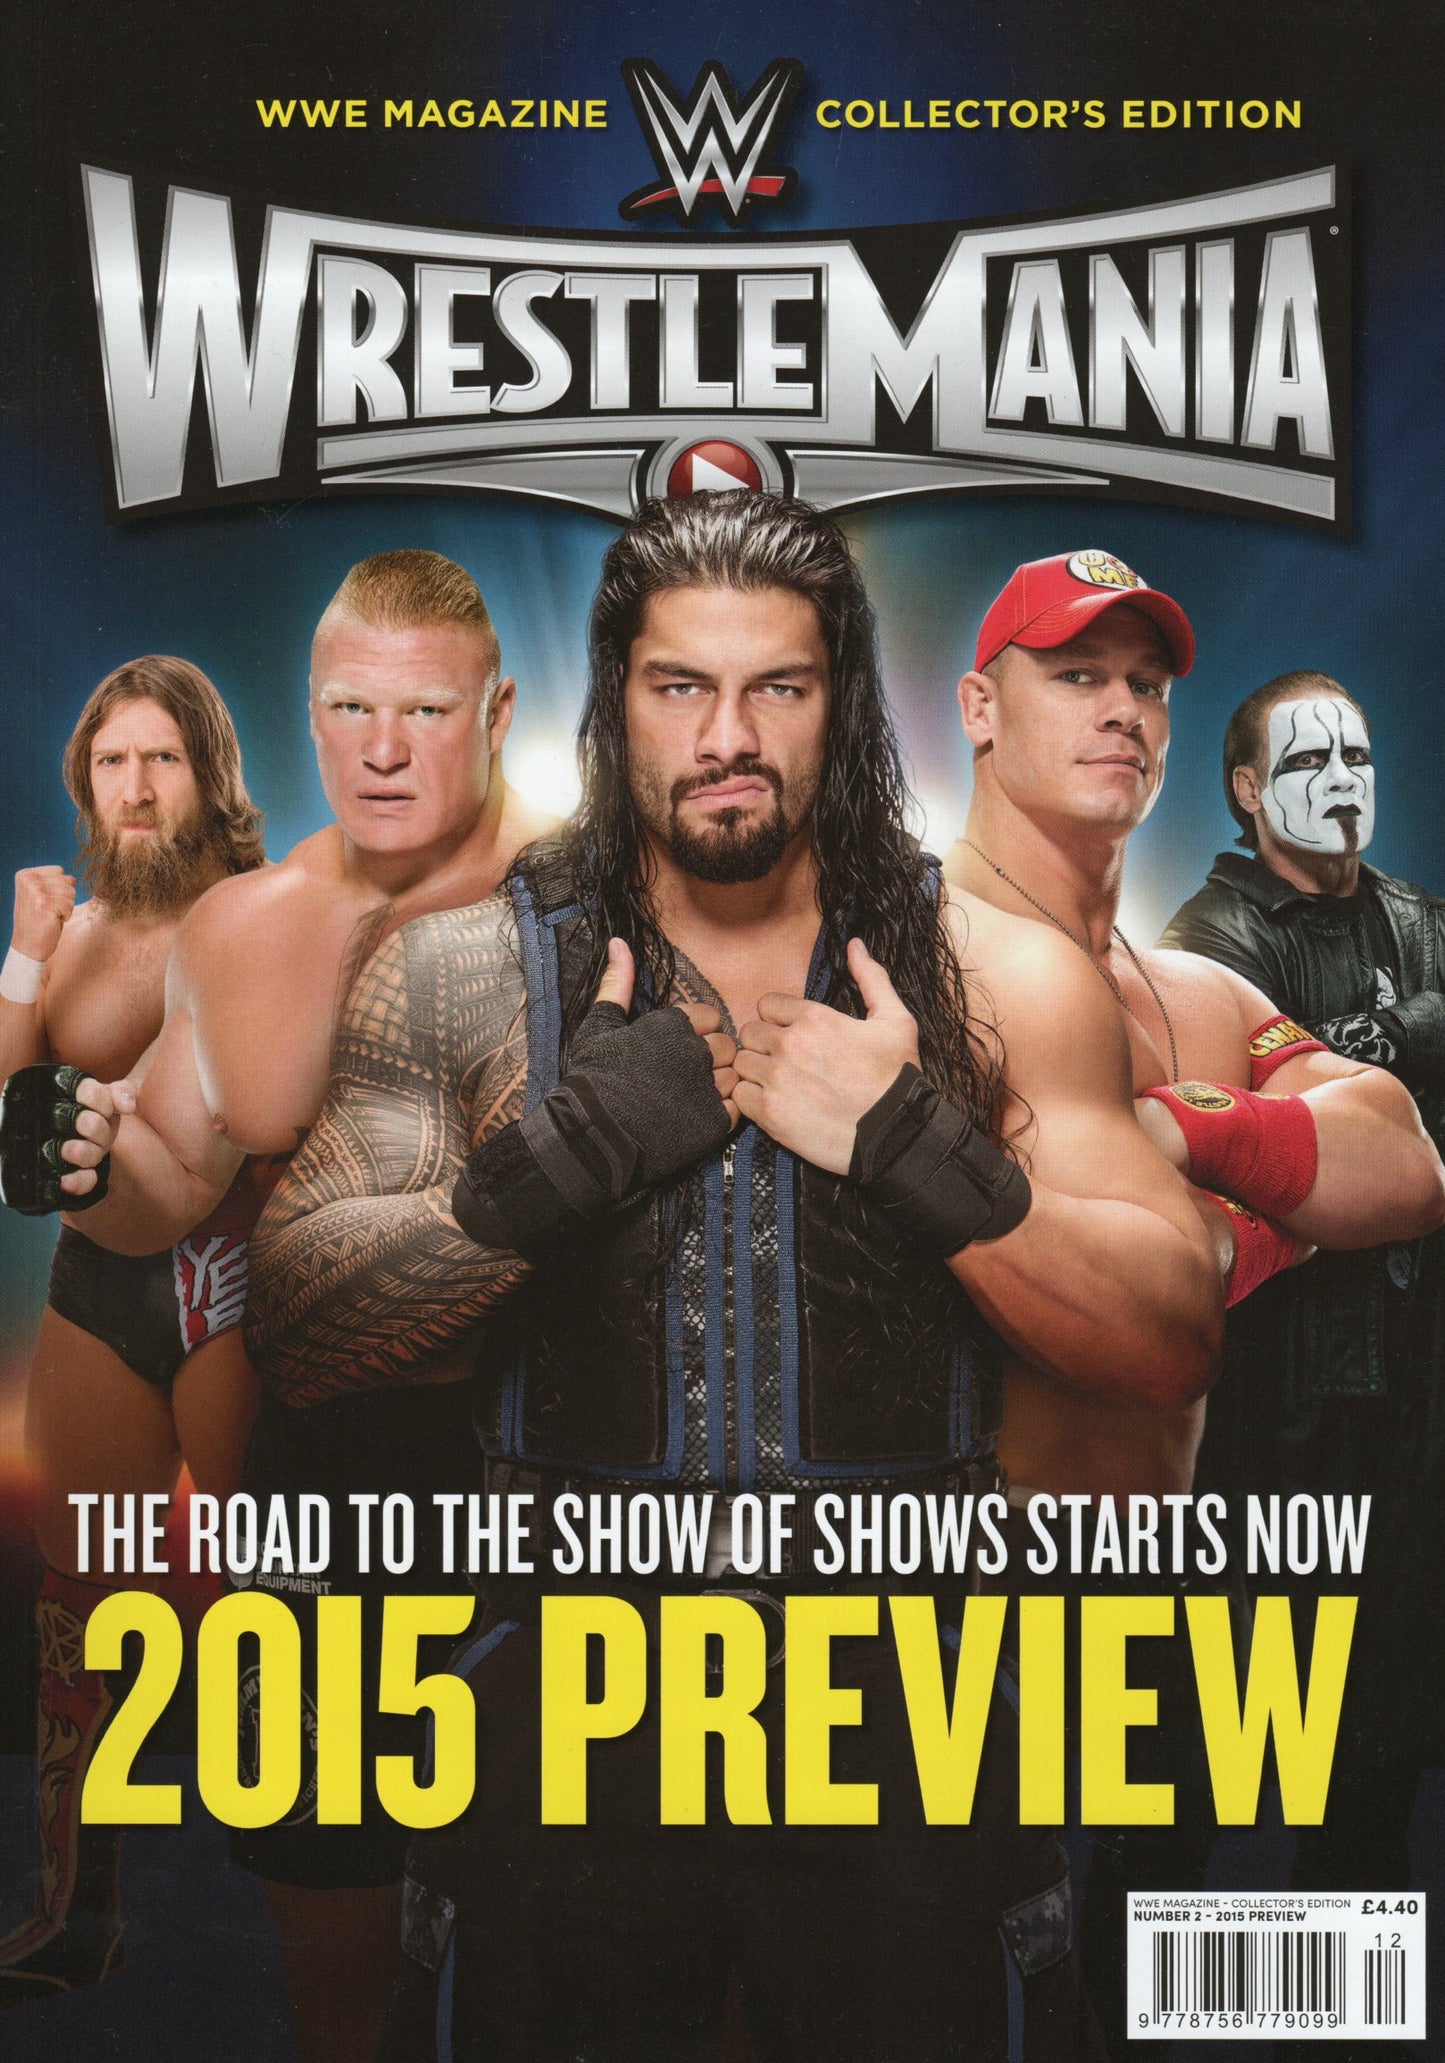 WWE Magazine 2015 Preview Collector's Edition